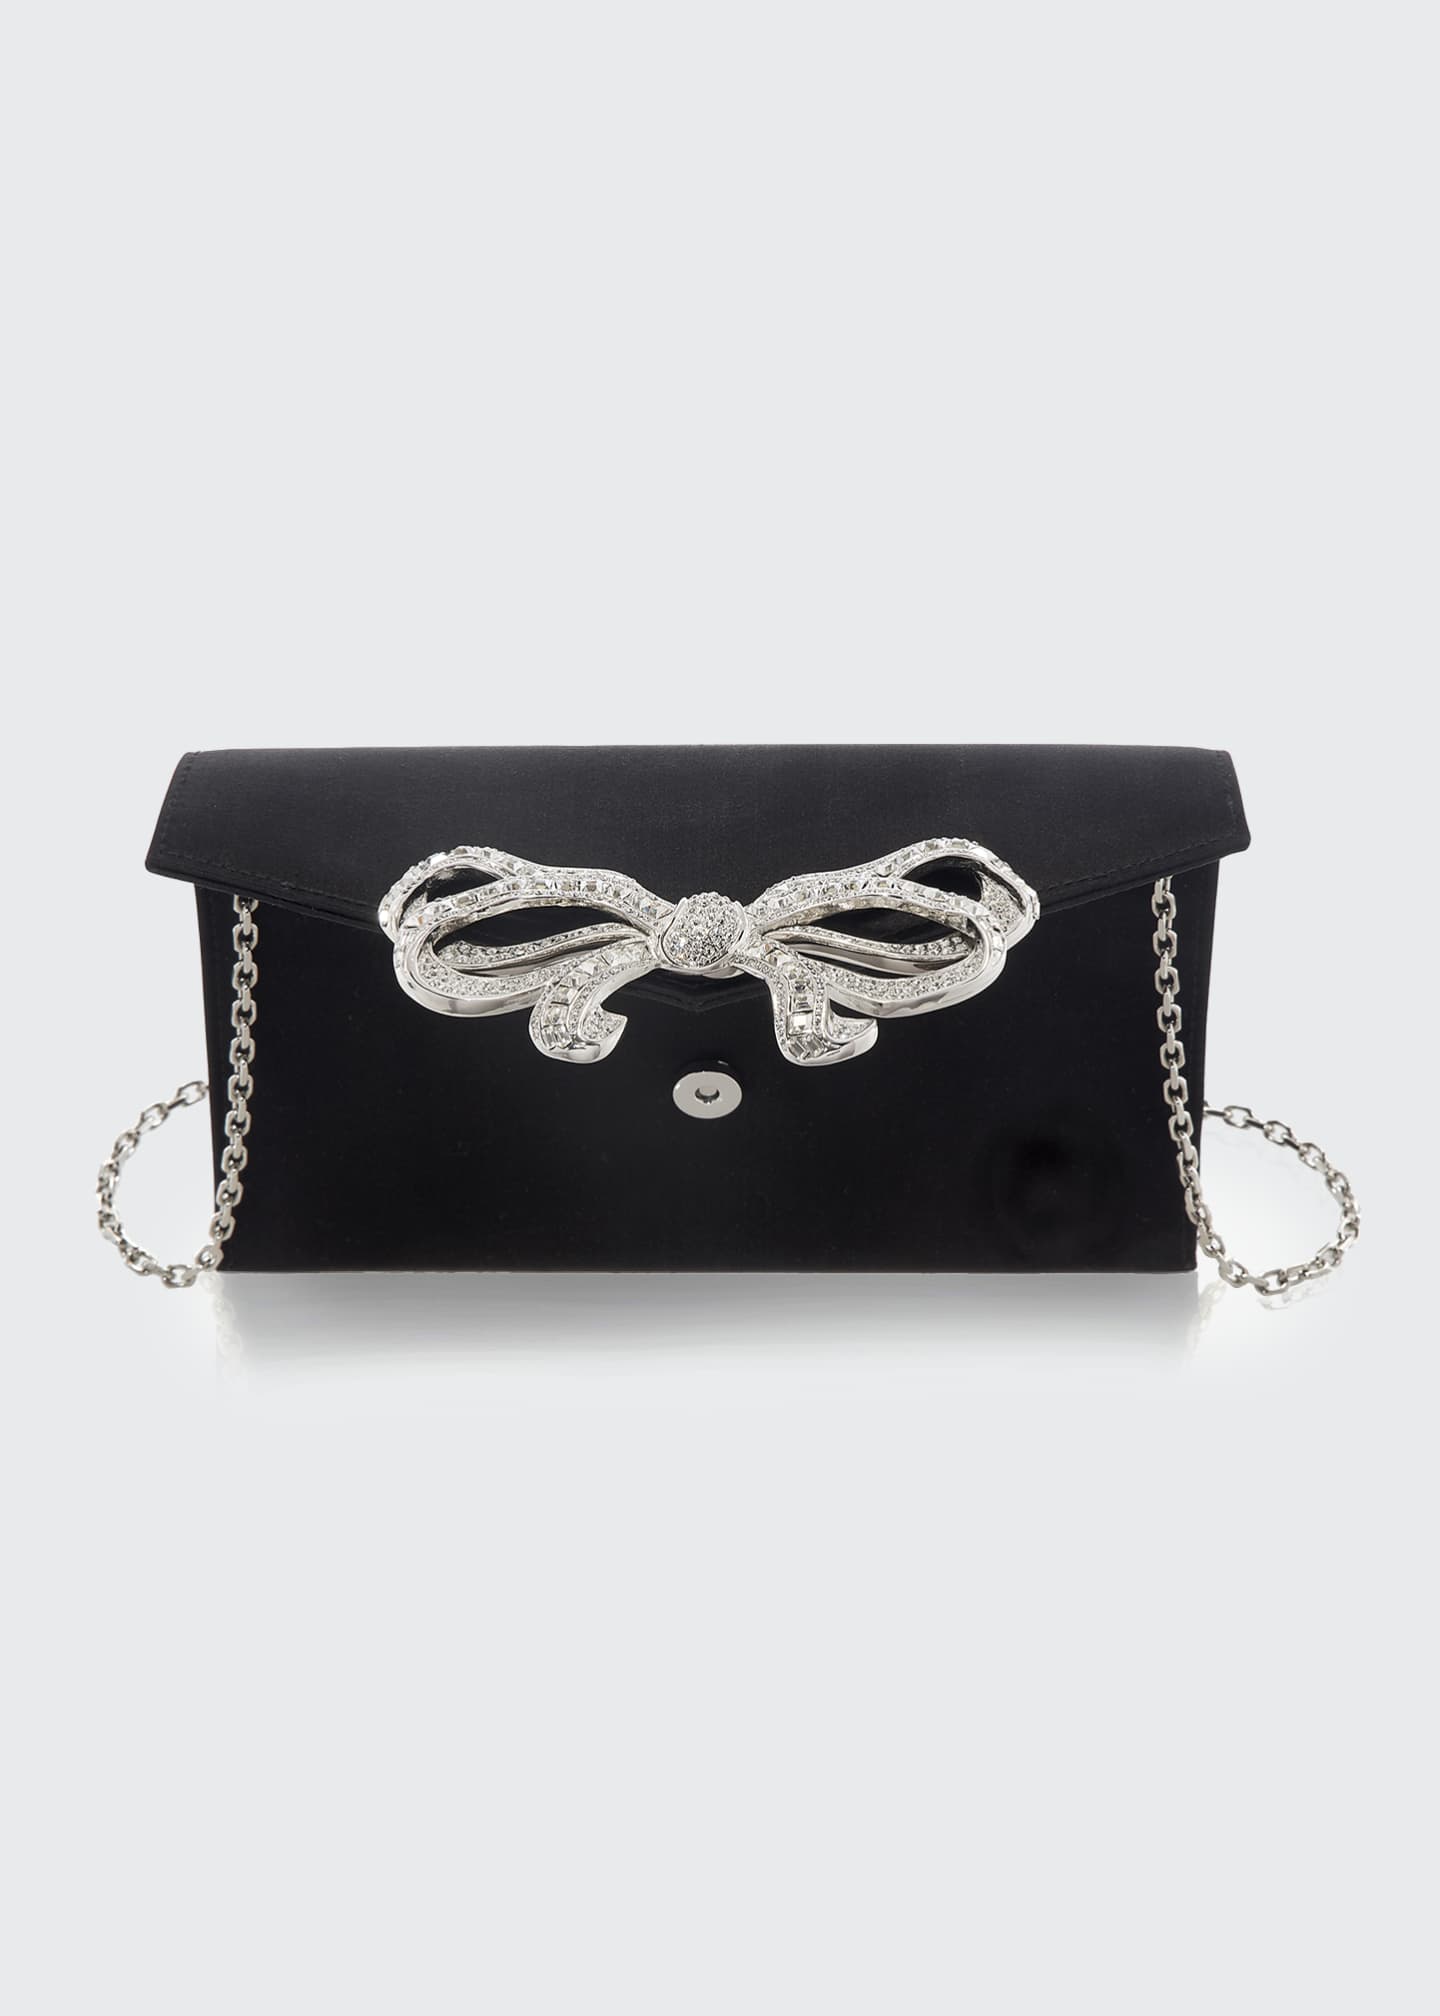 Judith Leiber Couture Crystal Bow Satin Envelope Clutch Bag - Bergdorf ...